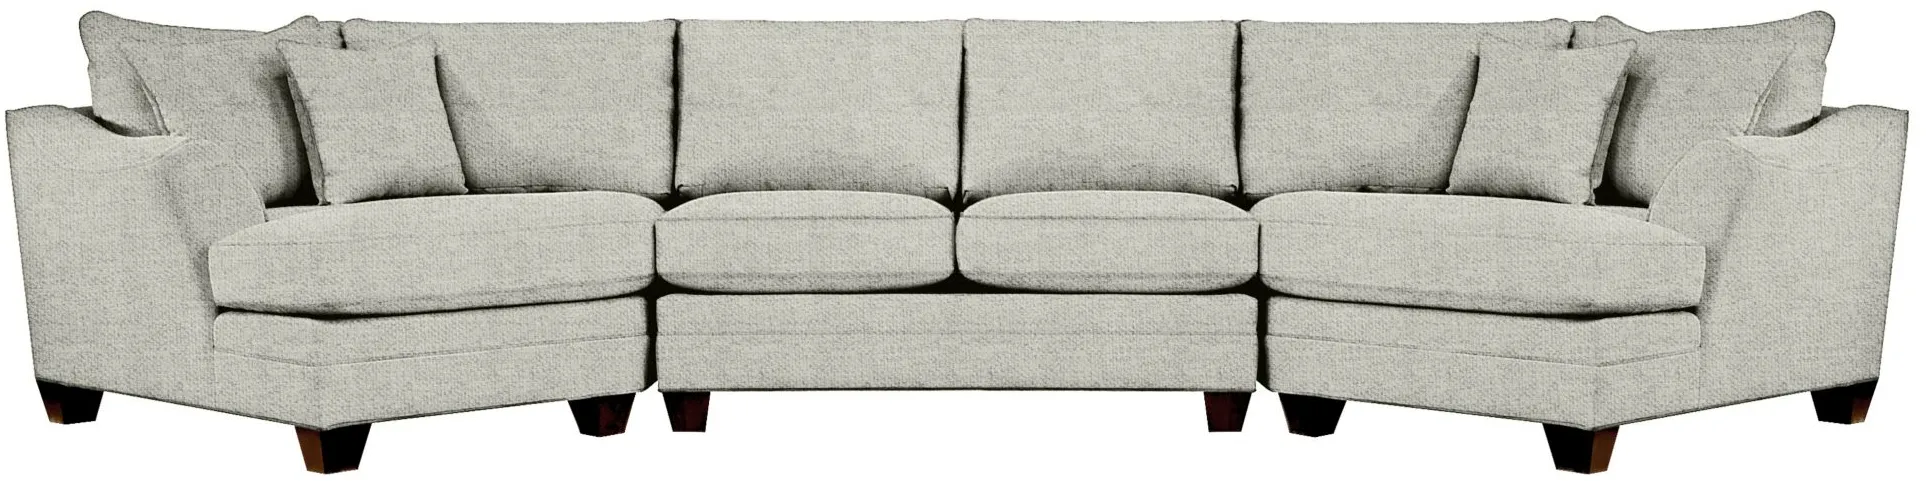 Foresthill 3-pc. Symmetrical Cuddler Sectional Sofa in Elliot Smoke by H.M. Richards